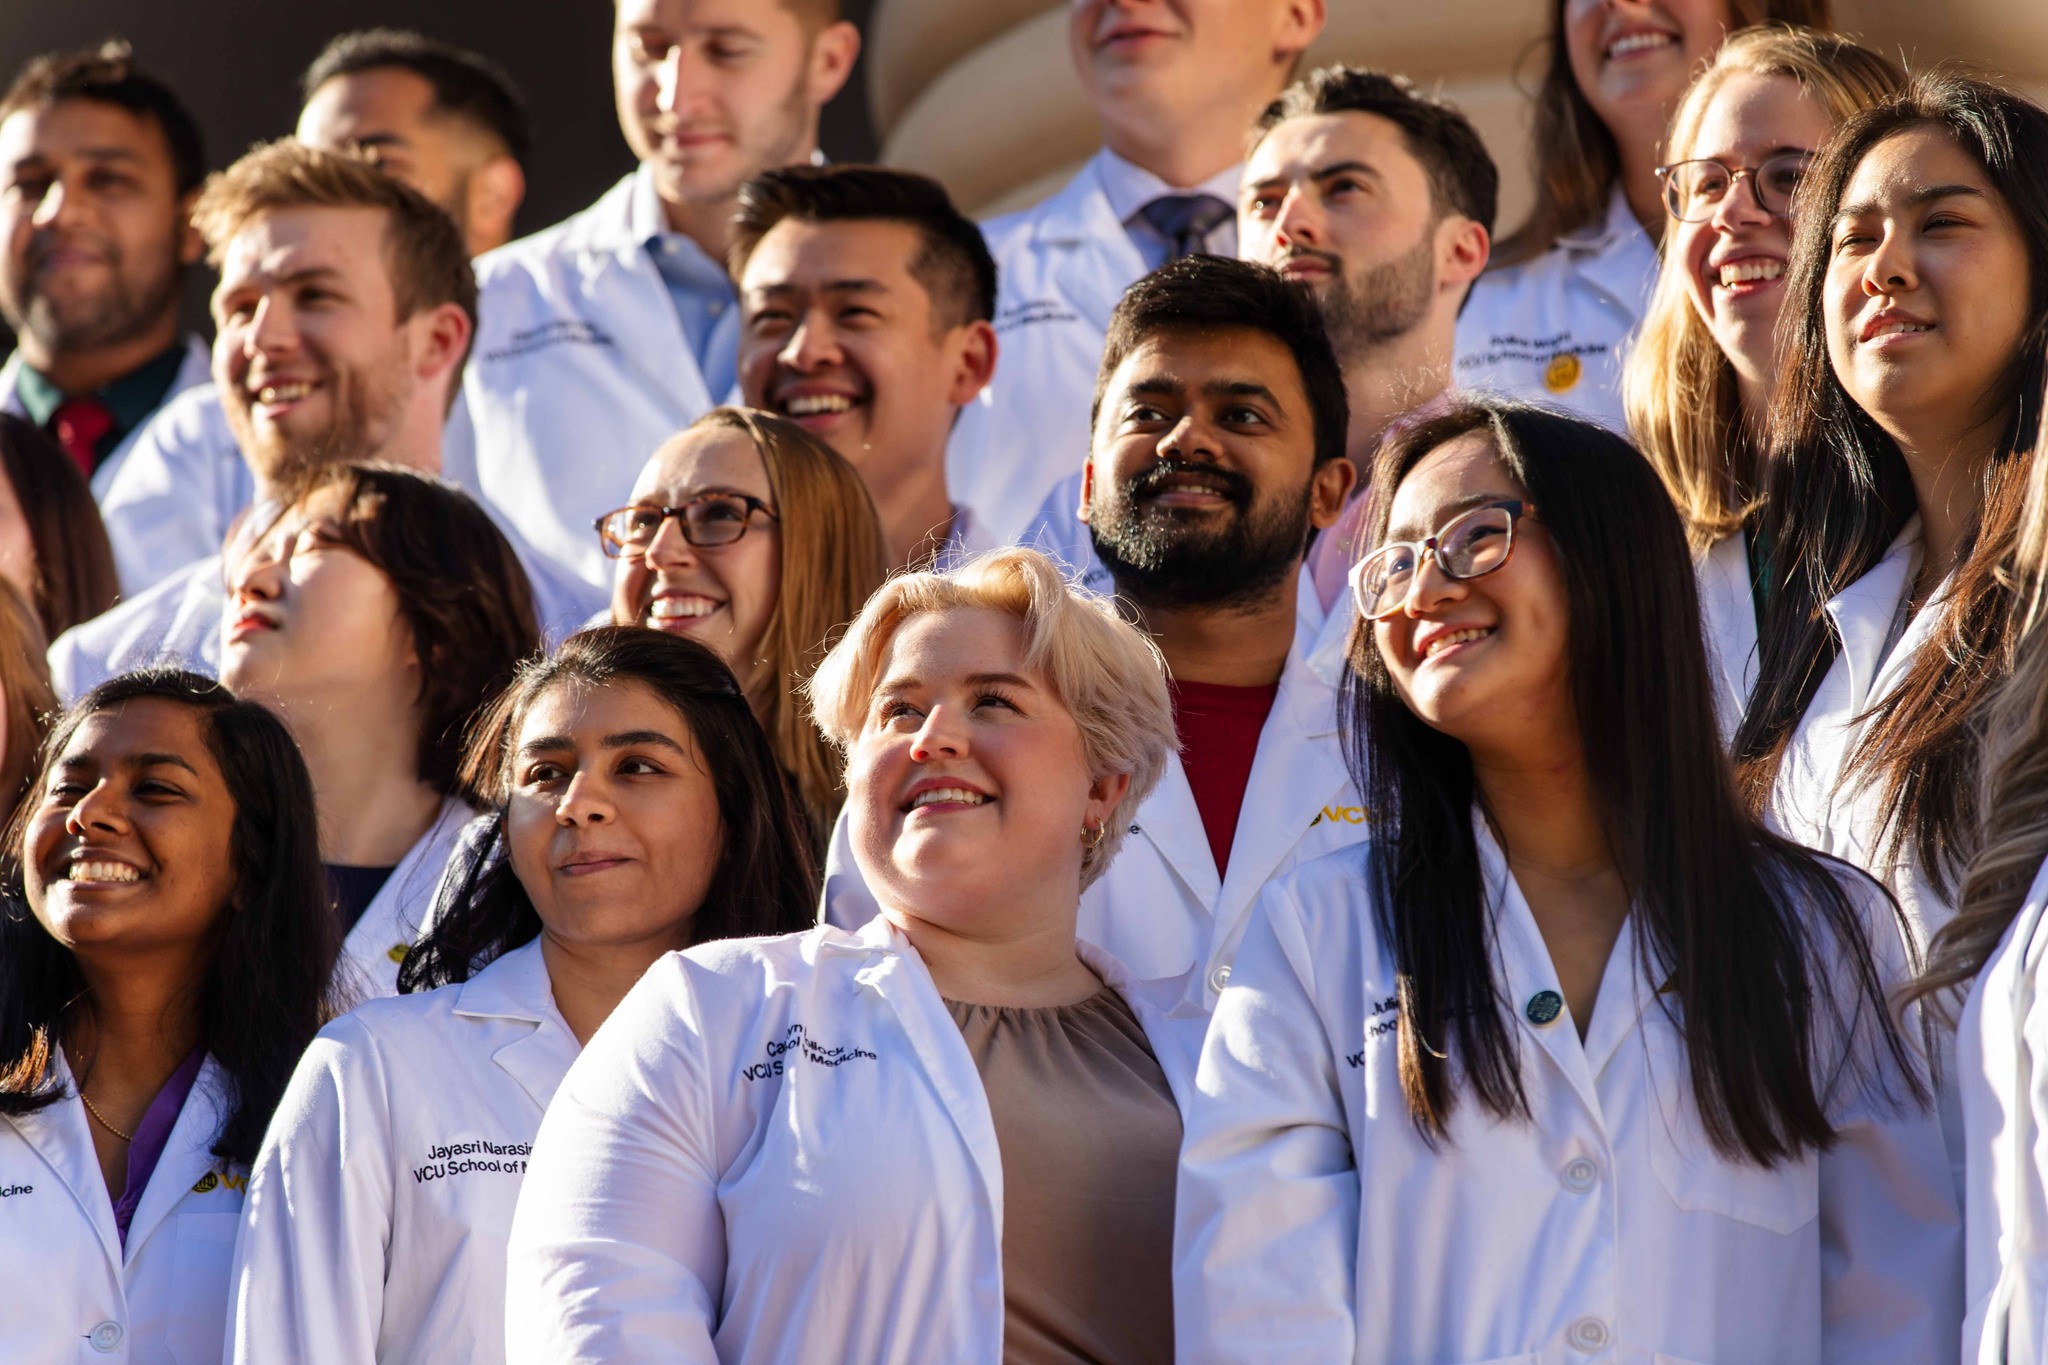 The School of Medicine Annual Fund awarded $375,000 in scholarships to 33 students in fiscal year 2023. Photo by Sha Aguado.